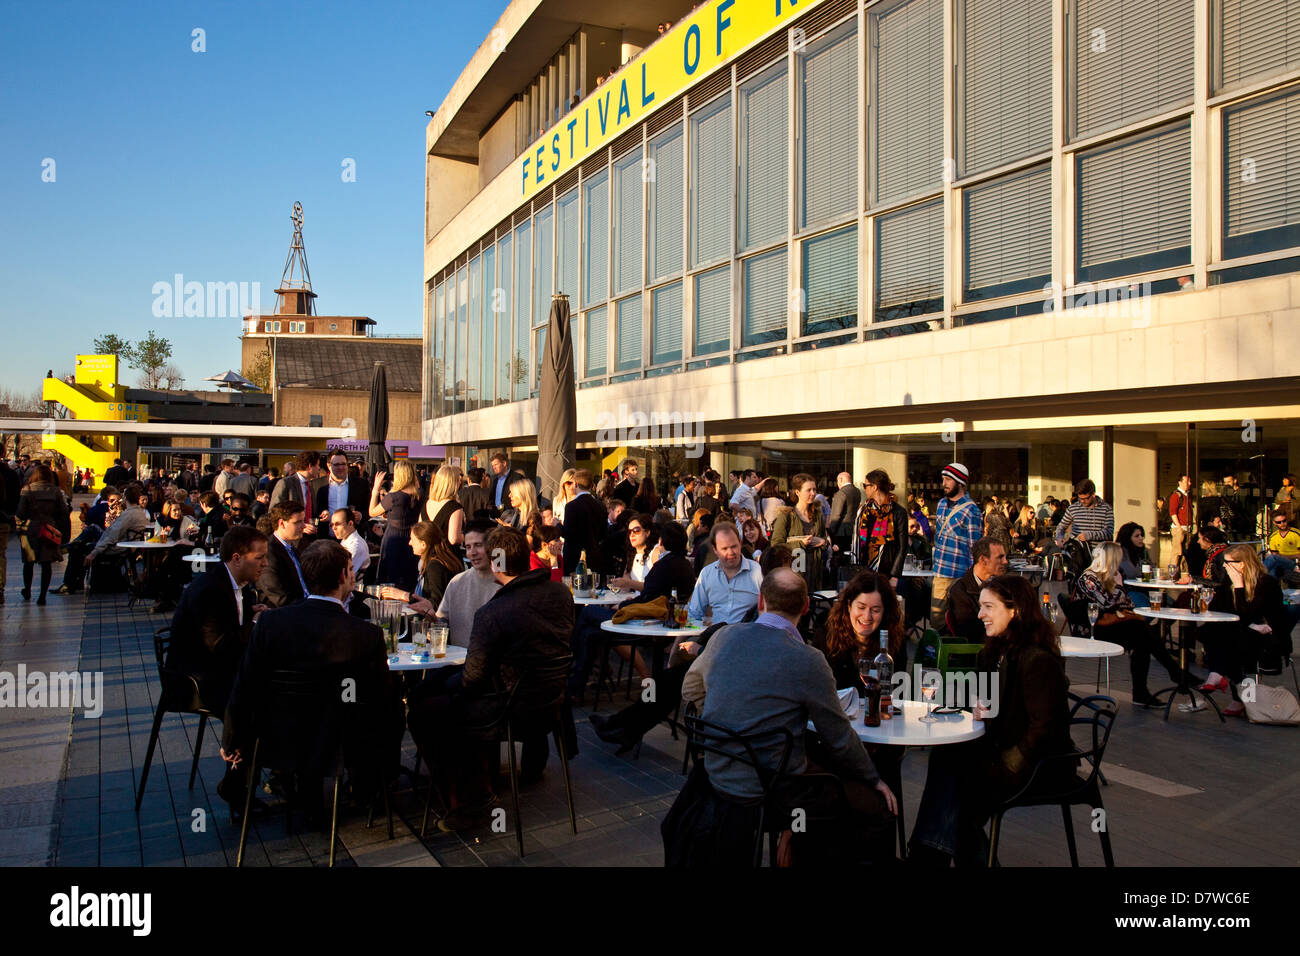 People Eating and Drinking at the Cafes and Restaurants, The Southbank, London, England, Stock Photo